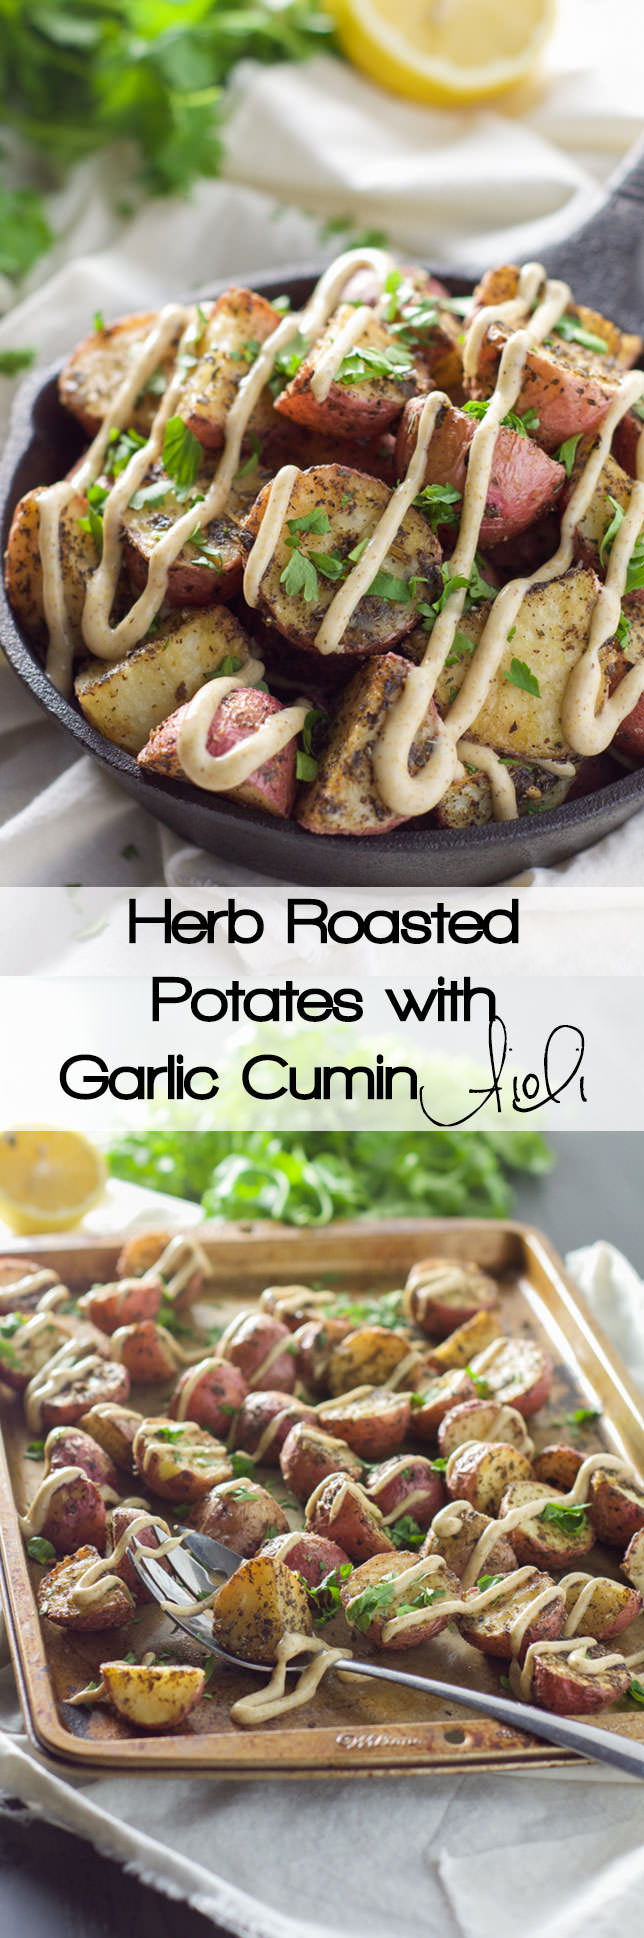 Roasted Herb Potatoes with Garlic Cumin Aioli are crunchy and creamy and served with a simple, garlic and cumin loaded aioli!